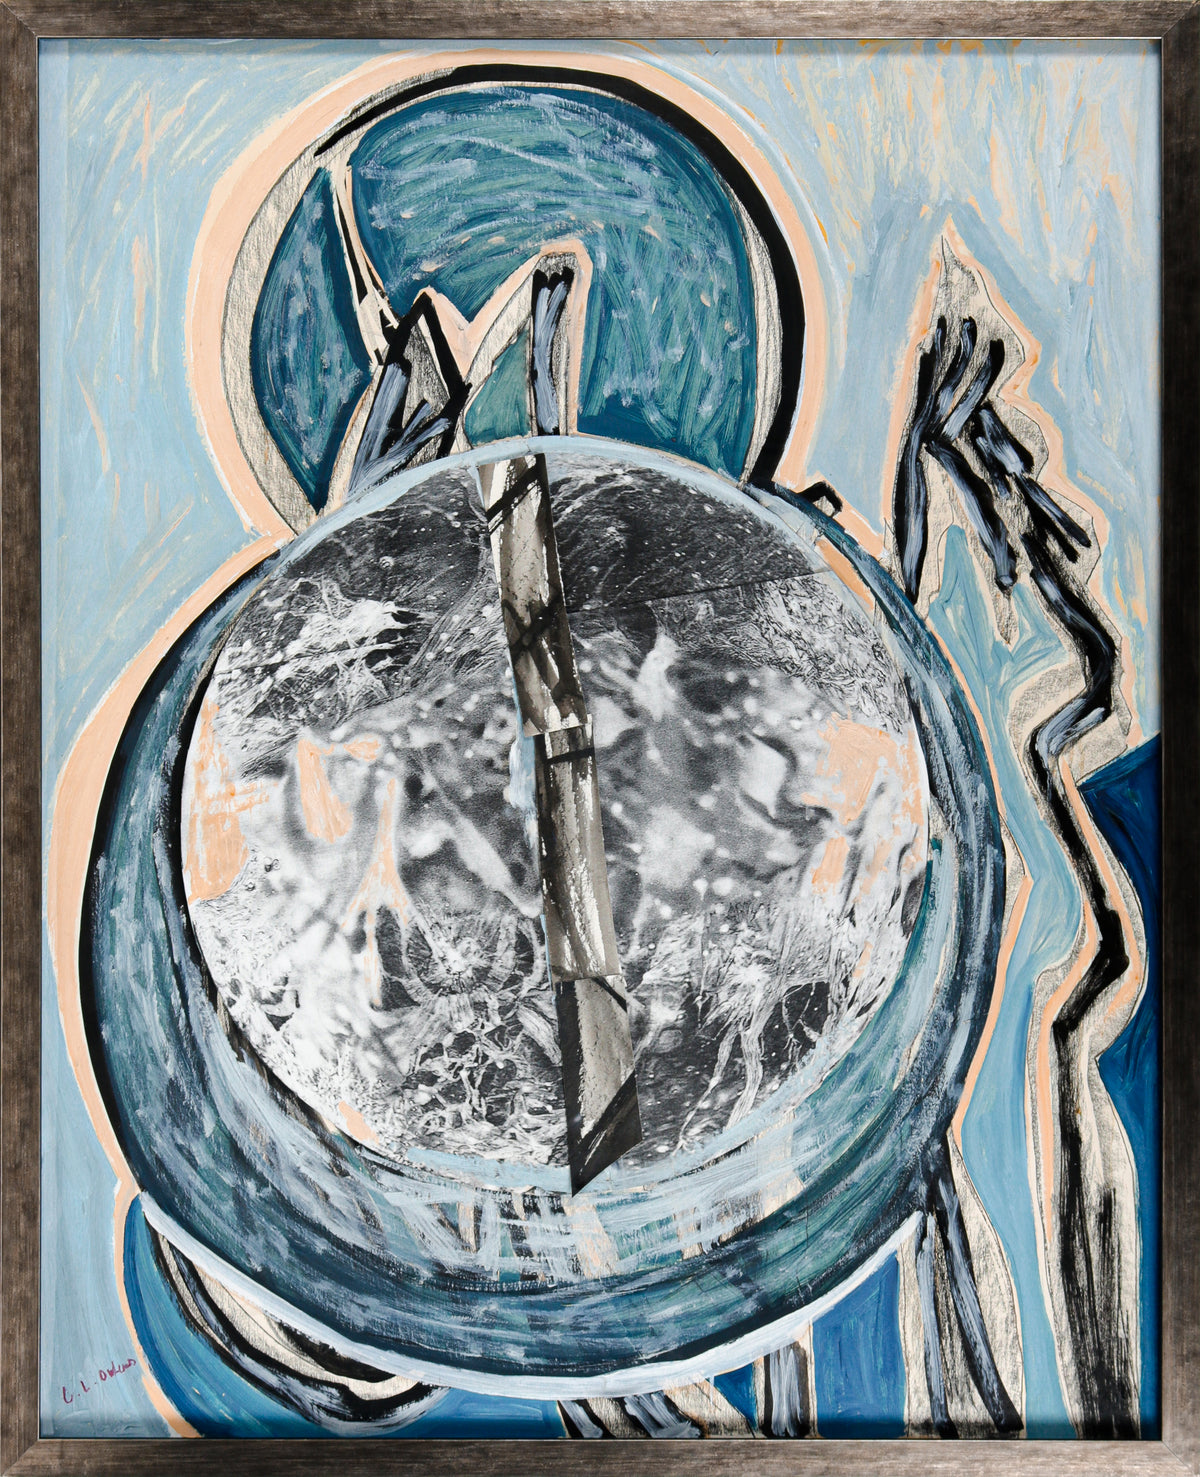 Circular Forms in Blue &lt;br&gt;20th Century Mixed Media &amp; Collage &lt;br&gt;&lt;br&gt;#B4613